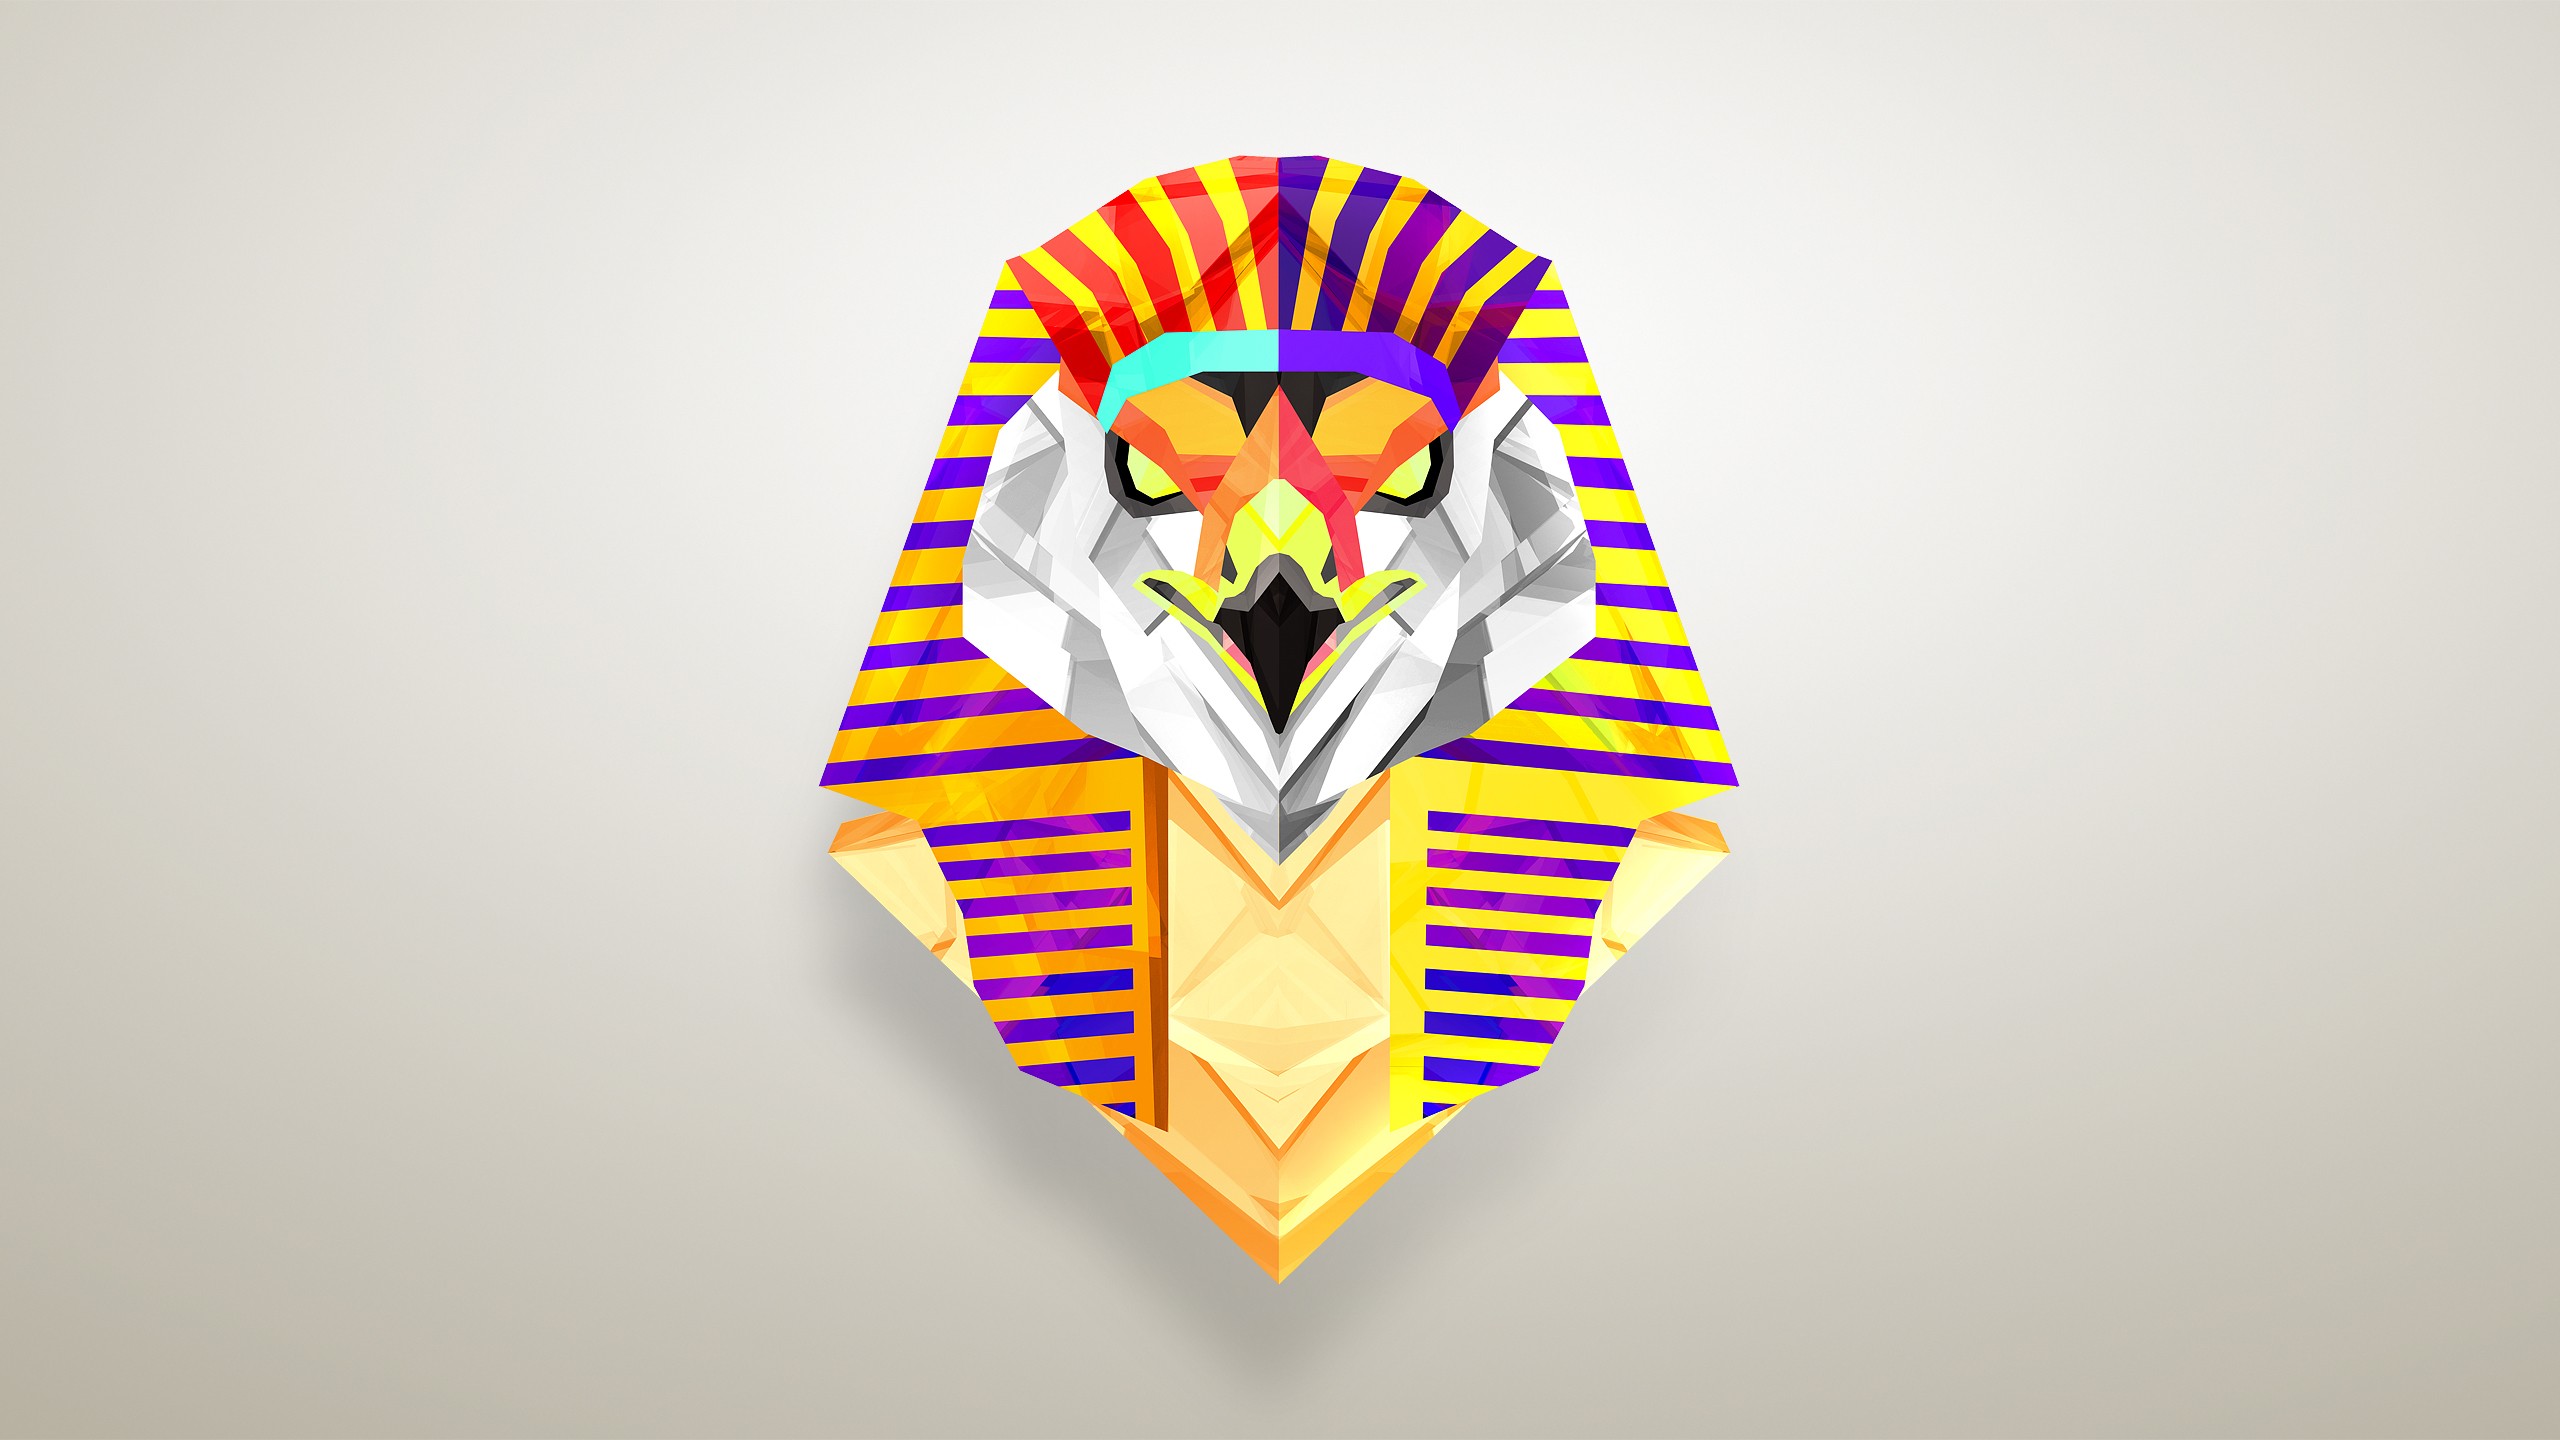 General 2560x1440 facets artwork Justin Maller simple background digital art white background gods CGI 3D Abstract abstract Horus (deity) Ra